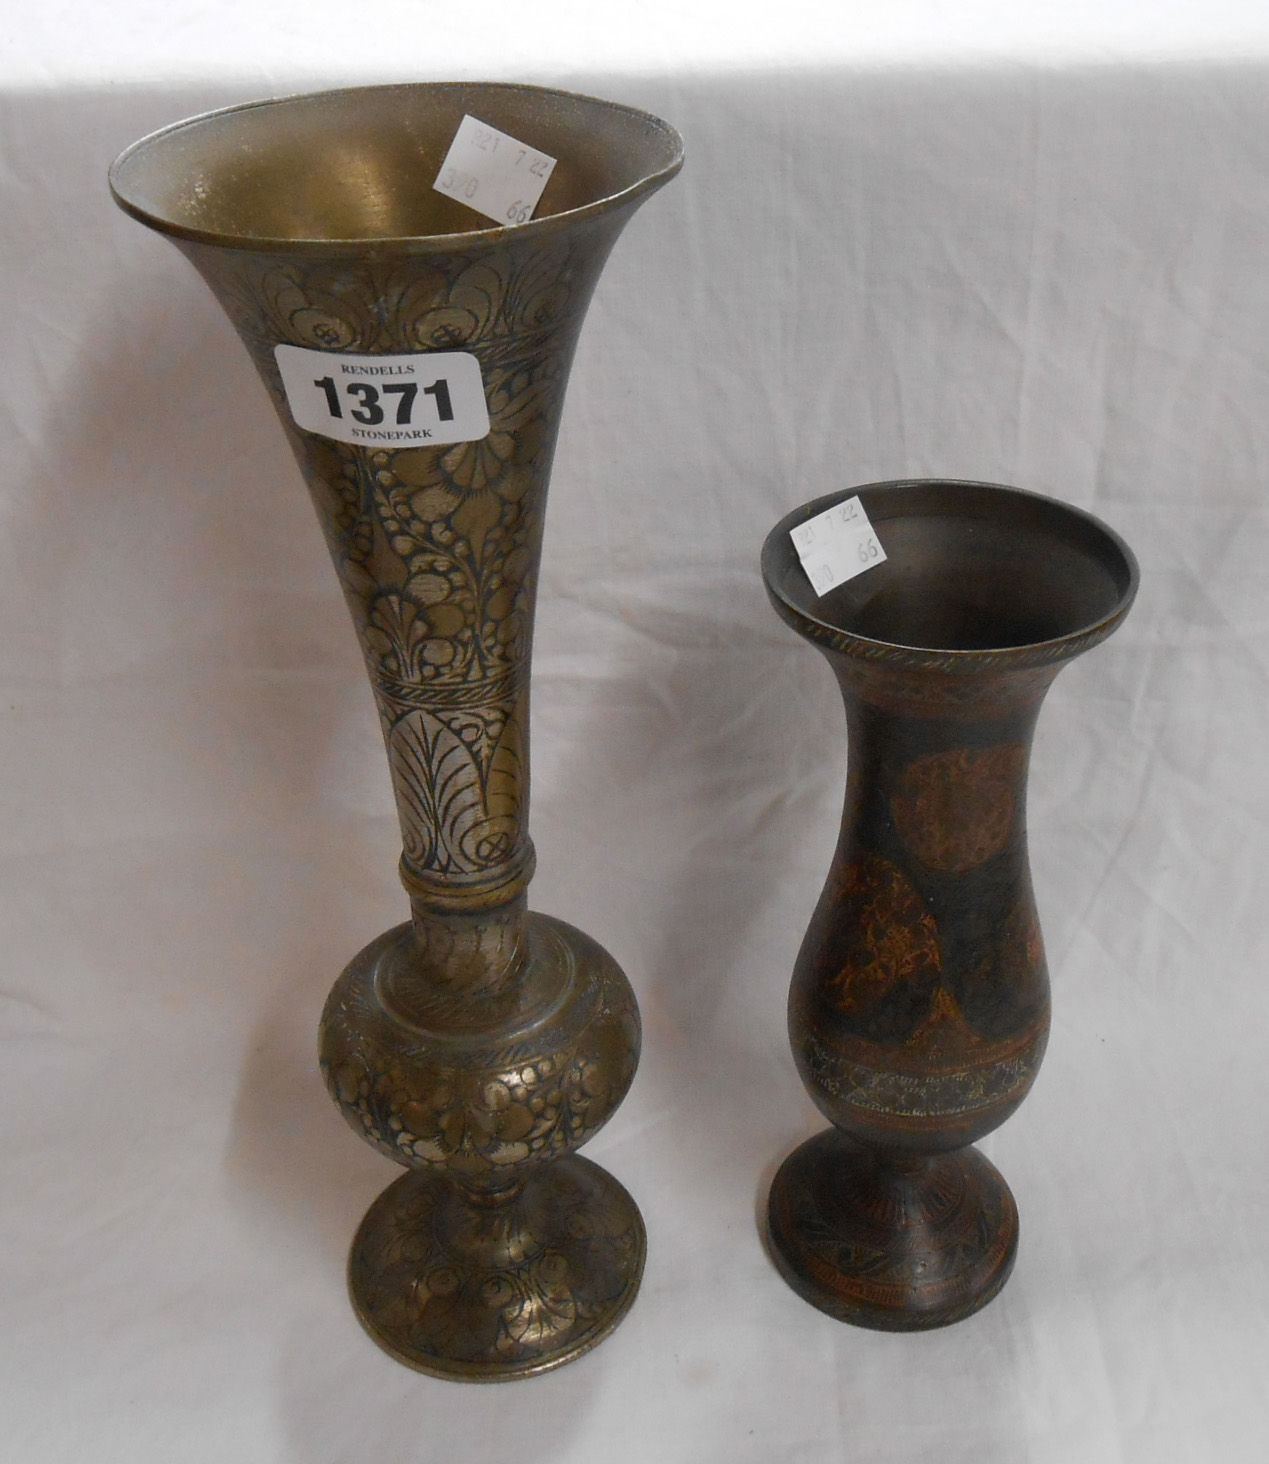 A 20th Century Eastern brass vase with chased decoration and silvered finish - sold with a smaller